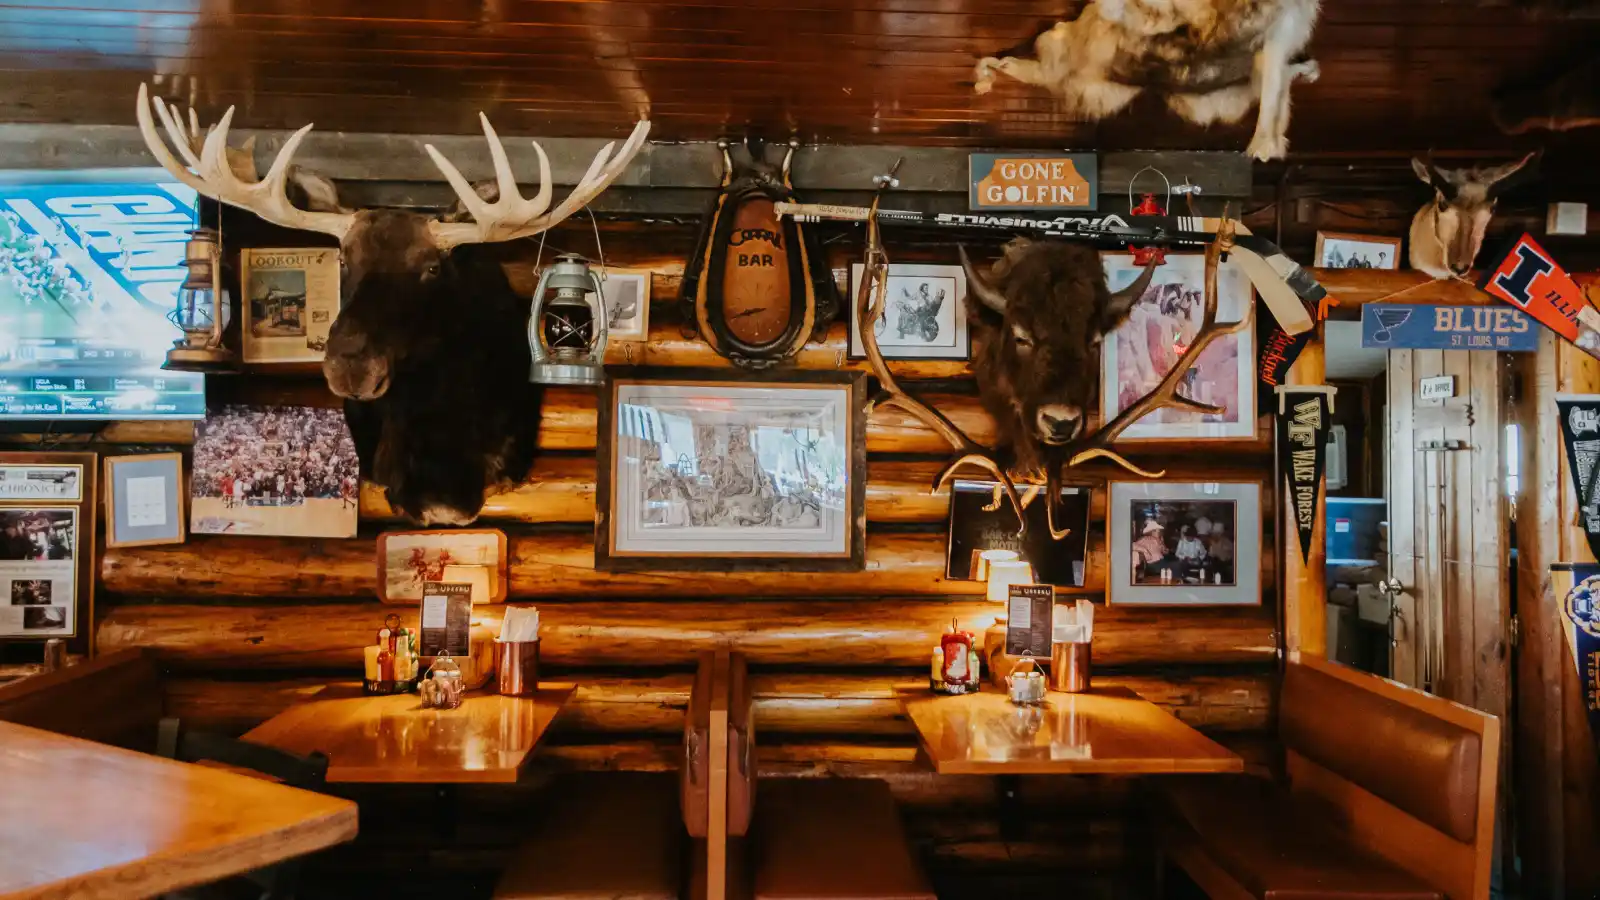 Decorations on the wall of the Corral Bar and Steakhouse including a buffalo head and moose head.